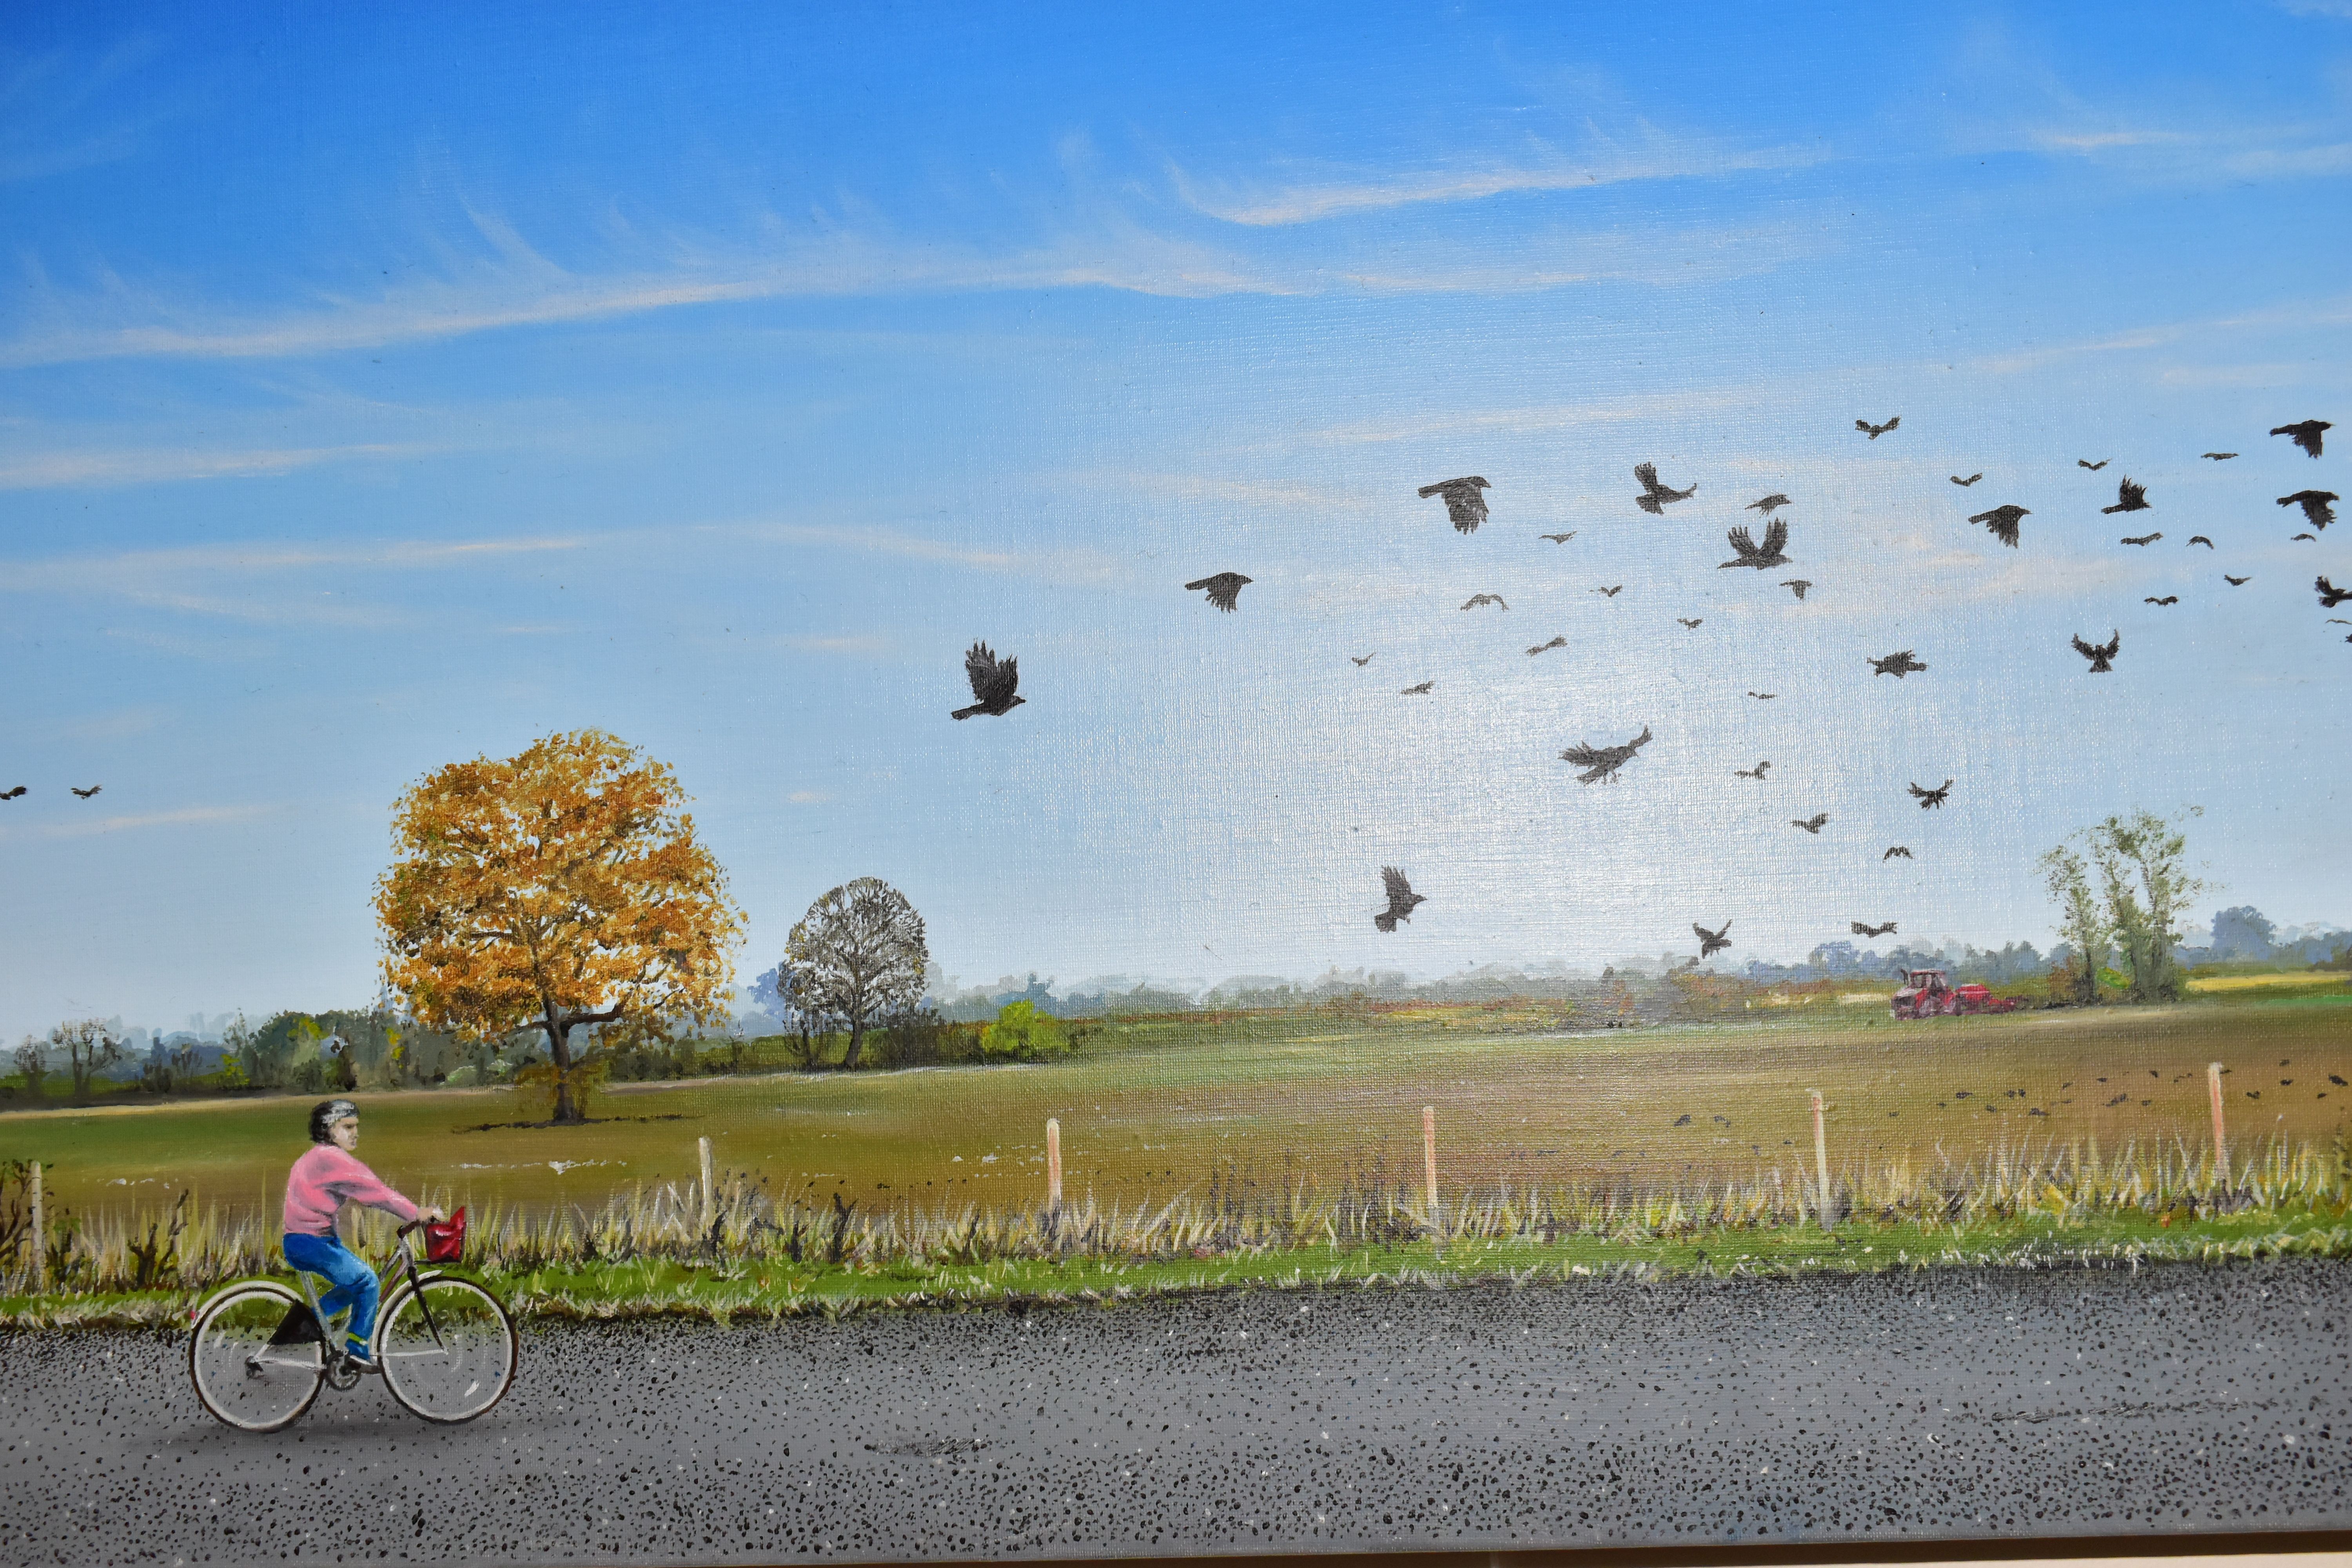 D. MITCHELL (CONTEMPORARY) CYCLISTS RIDING ALONG A RURAL ROAD, signed and dated bottom right 2002, - Image 3 of 4